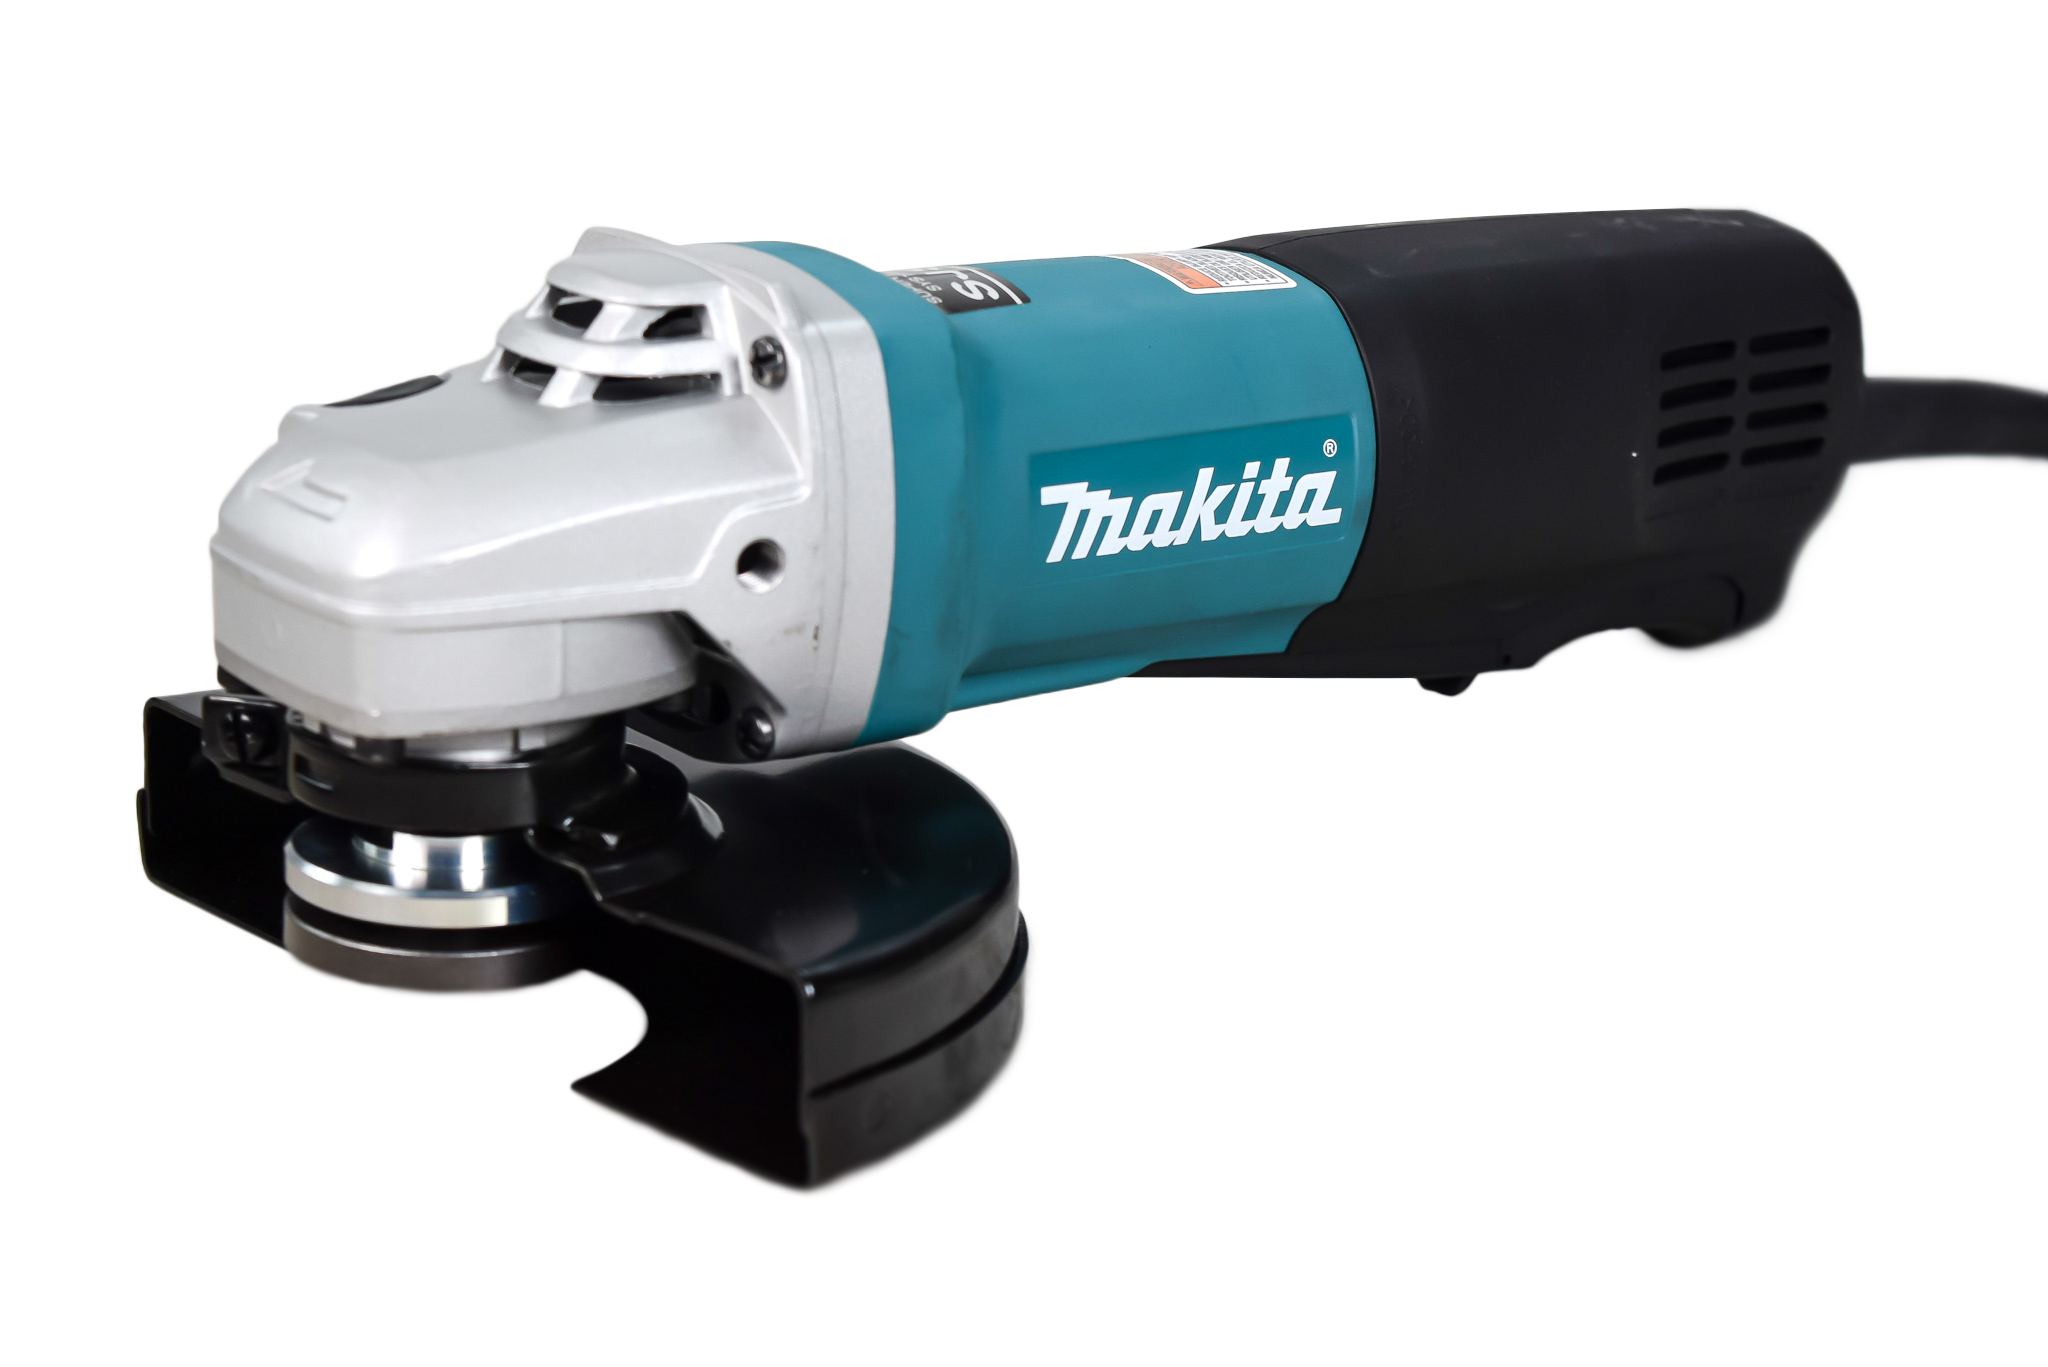 Makita 13 Amp in. SJS High-Power Paddle Switch Cut-Off/Angle Grinder  9566PCX1